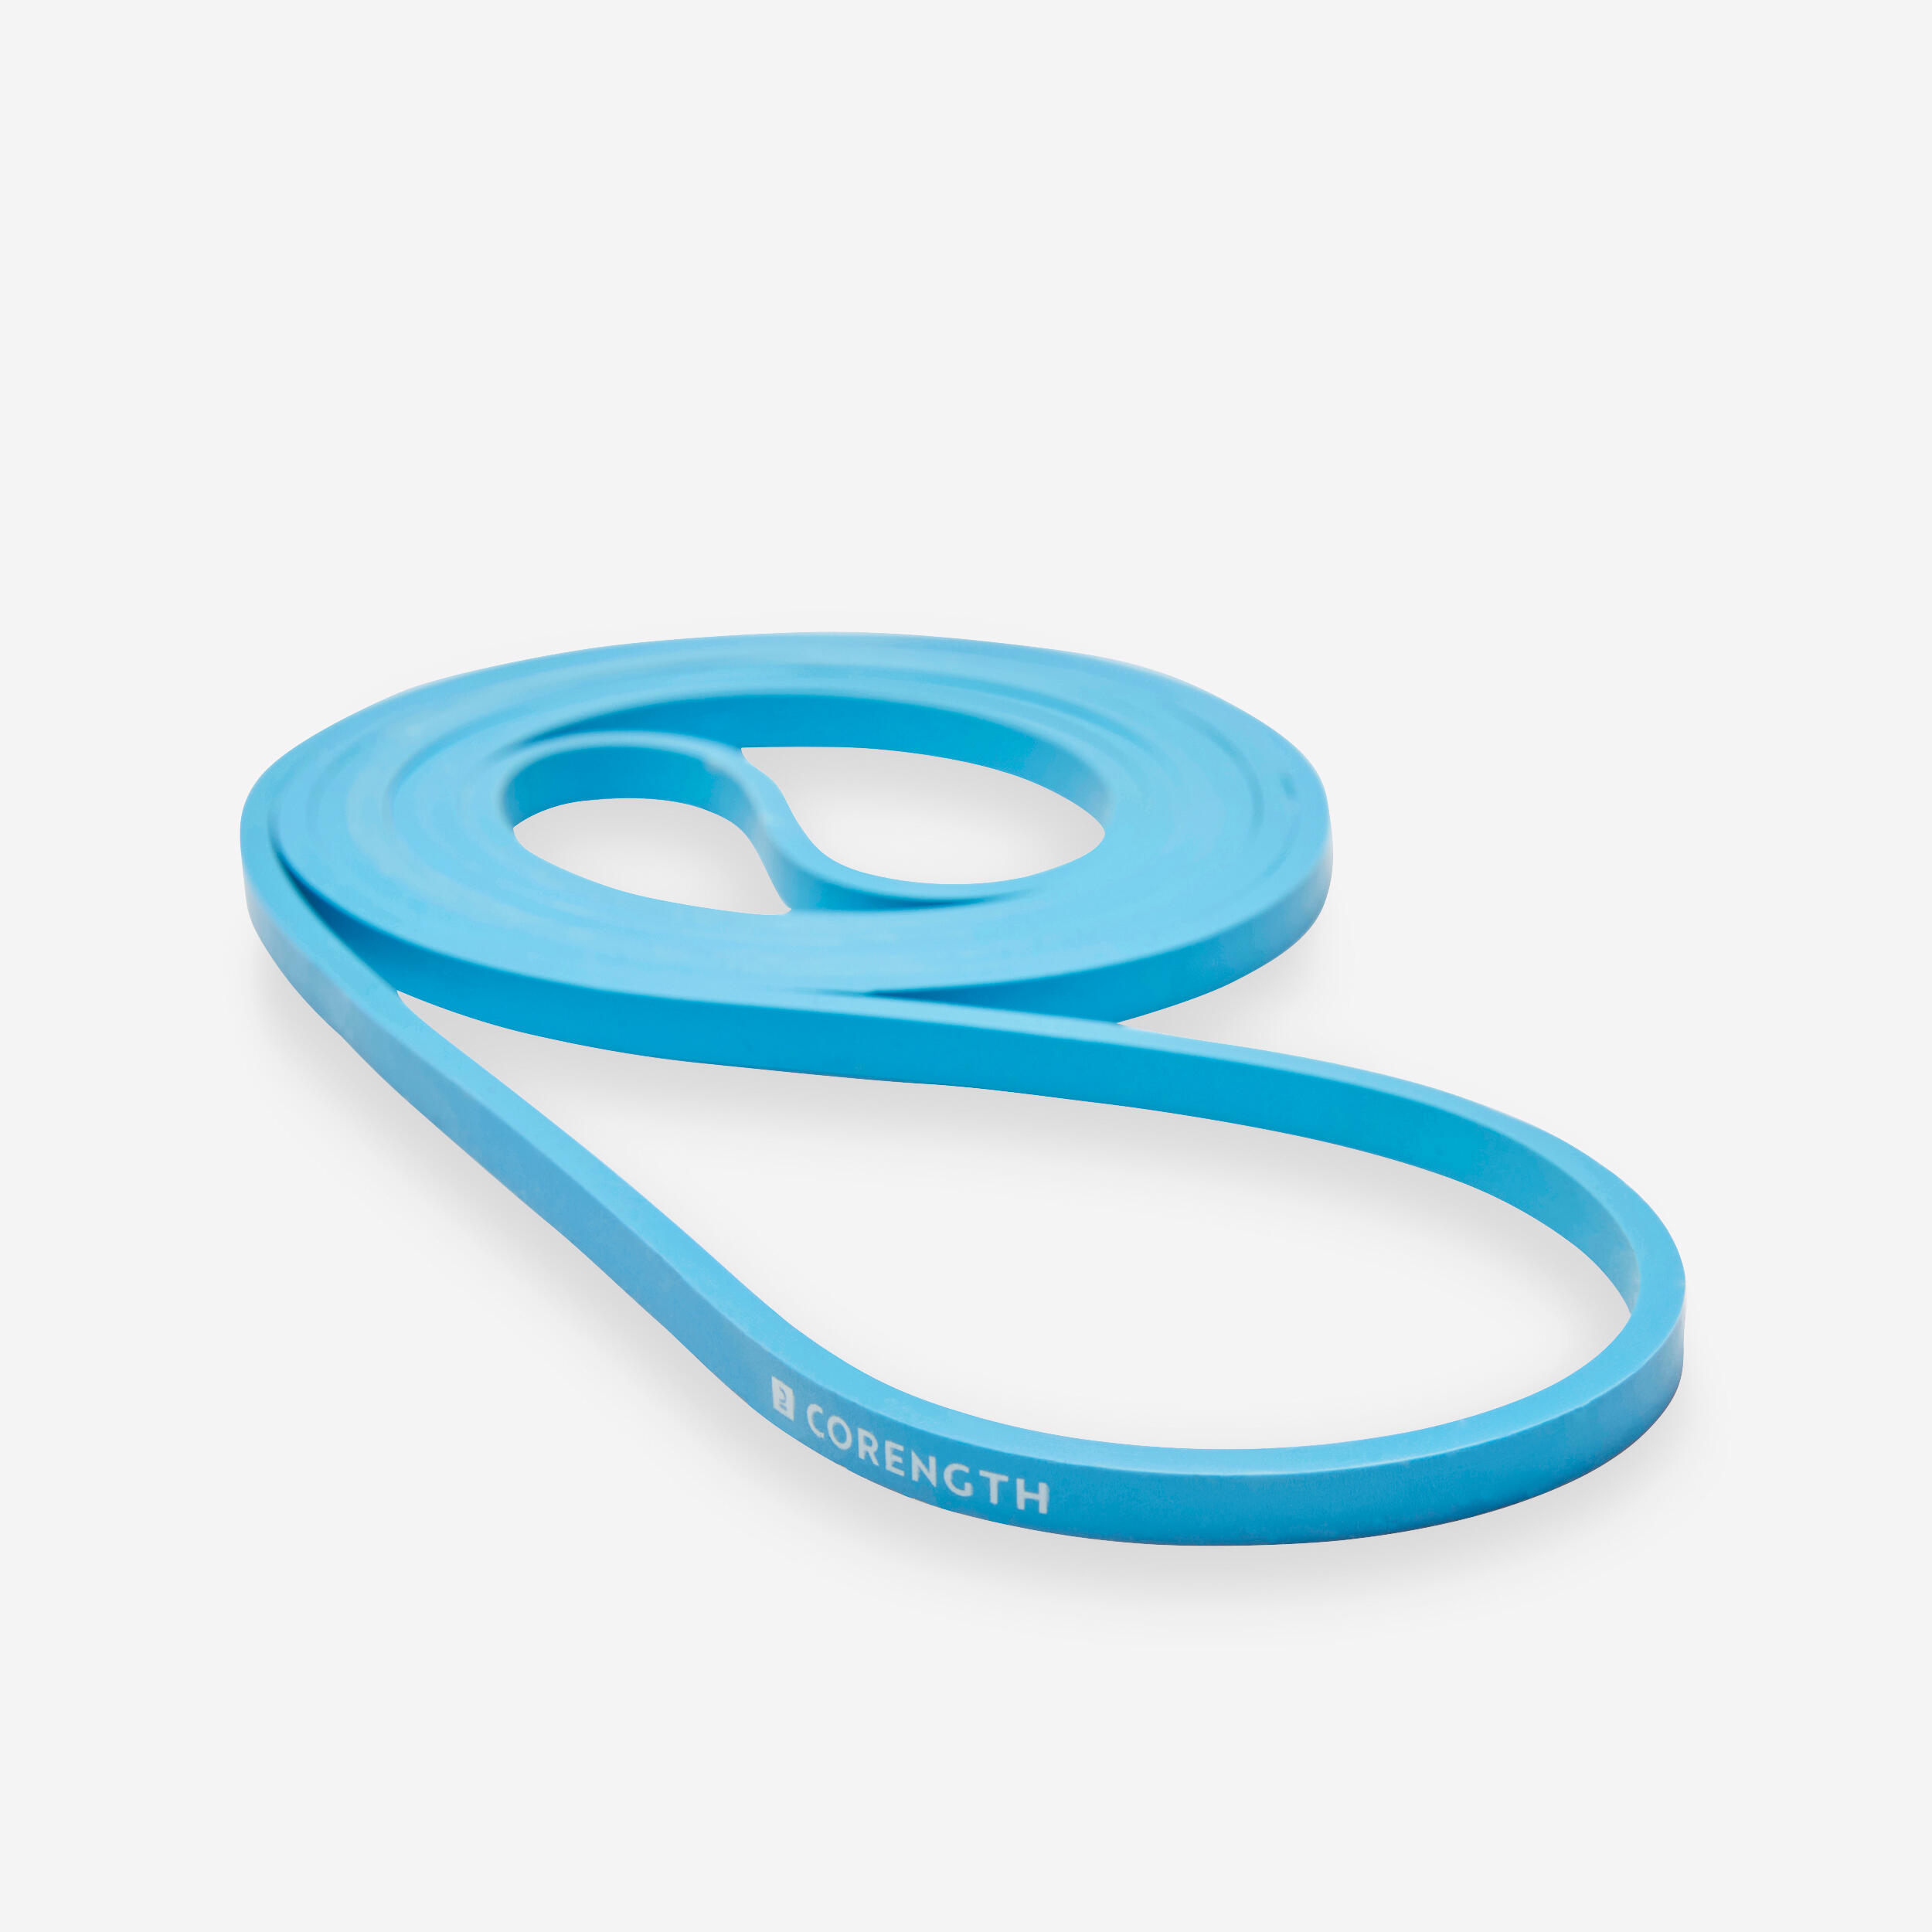 Weight Training Band 5 kg - Blue 1/8